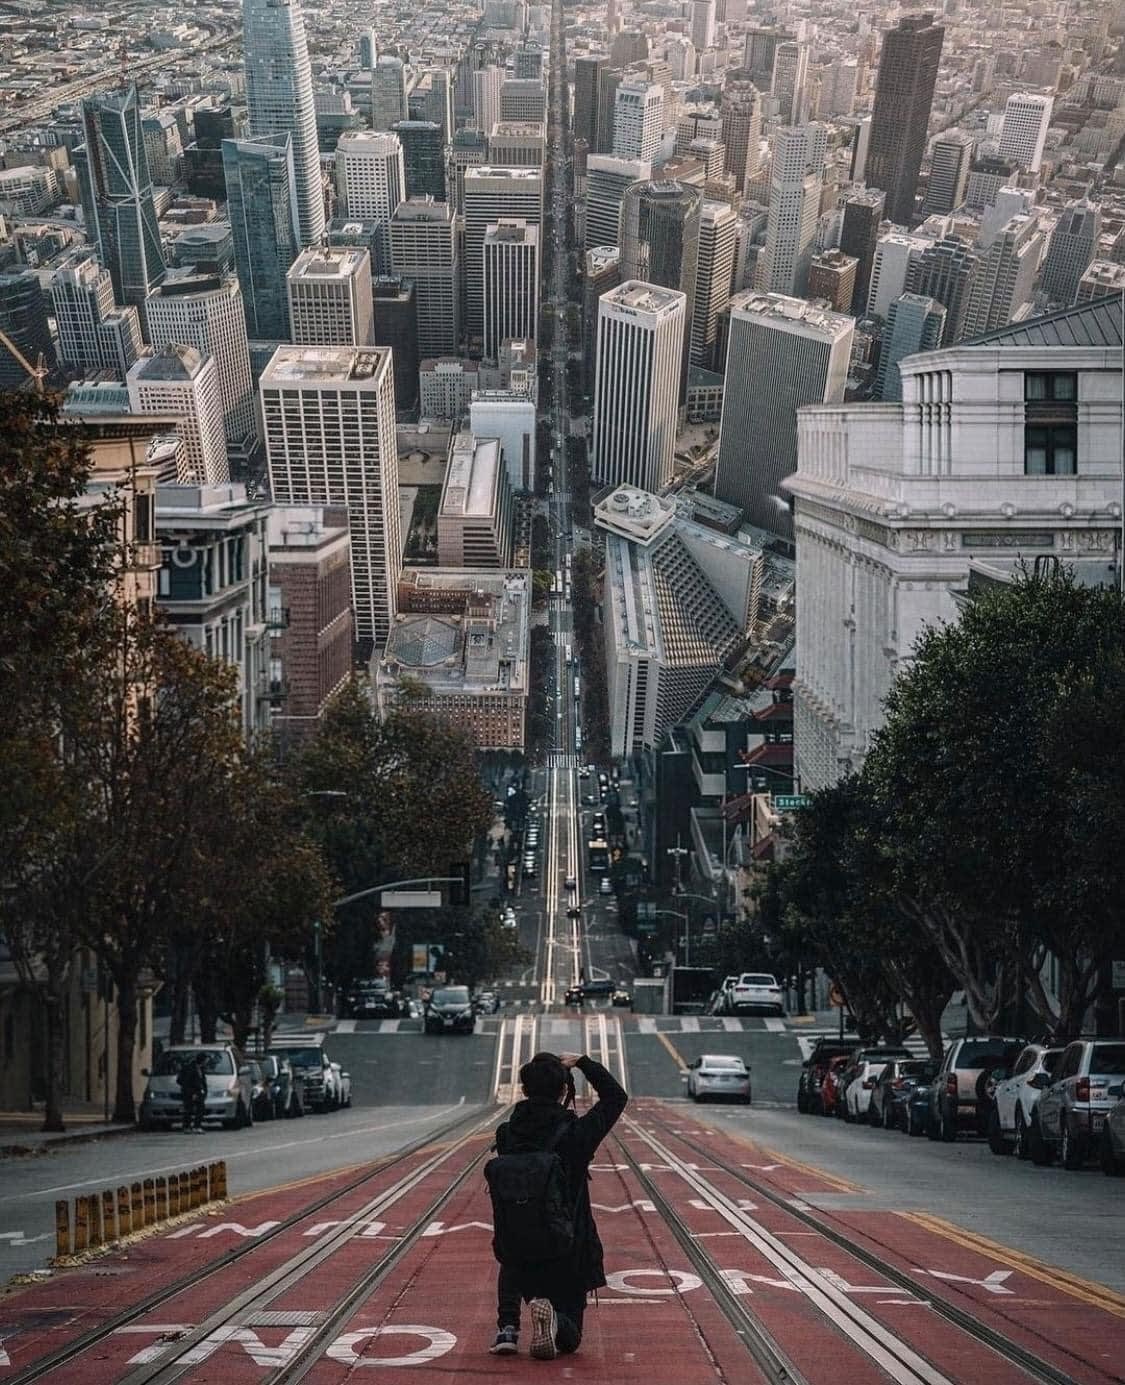 San Francisco From a Steep Perspective